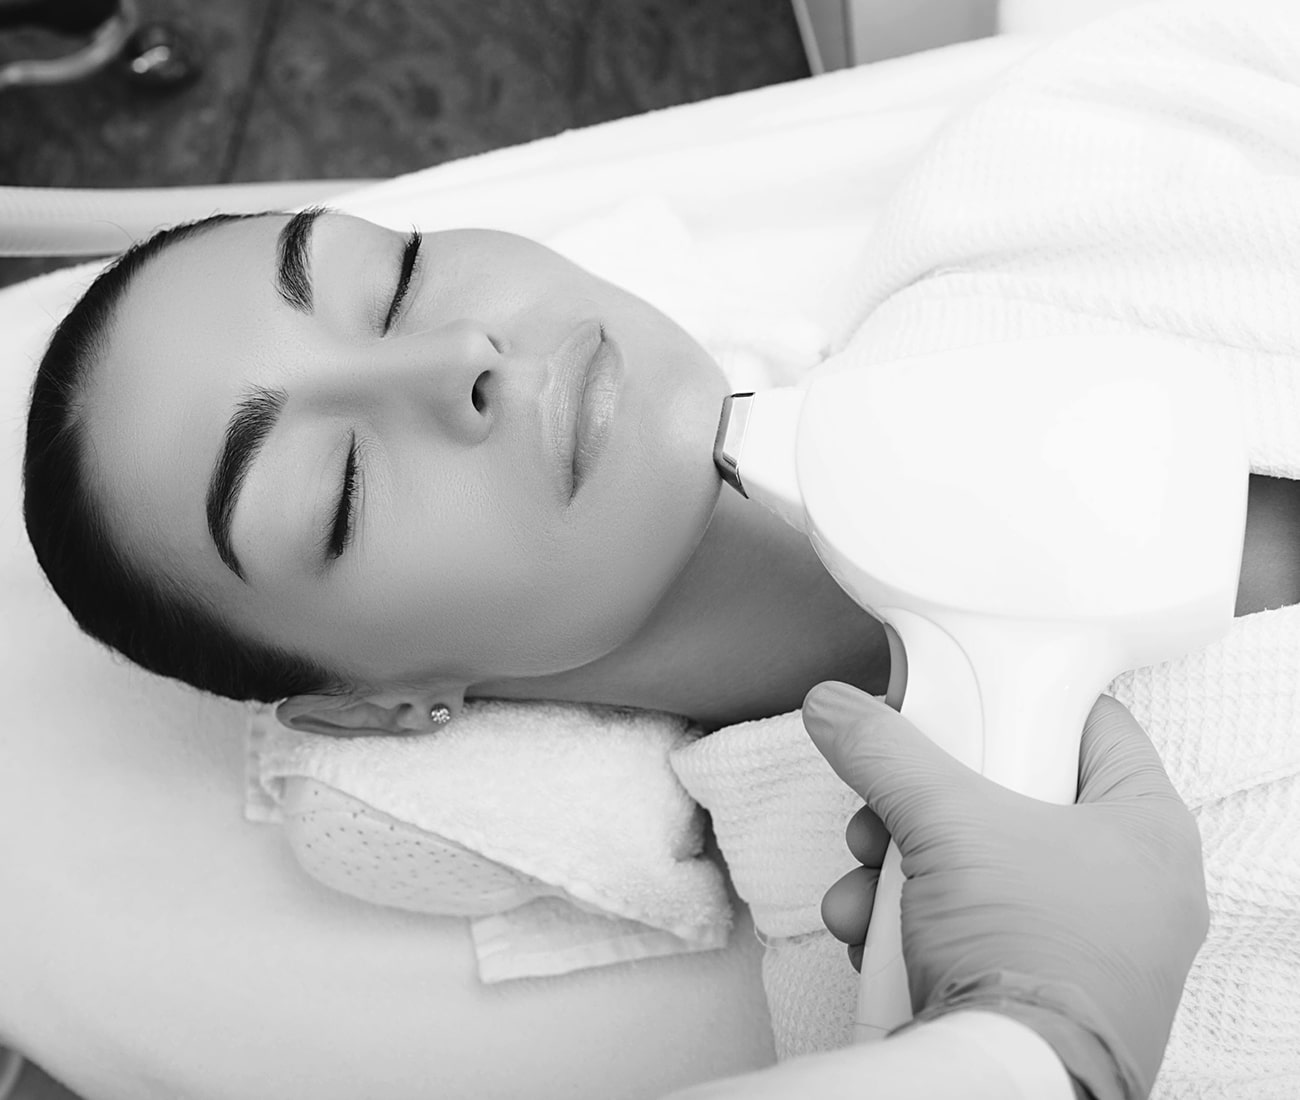 A Patient Receiving Laser Hair Removal Treatment, Black And White Photo